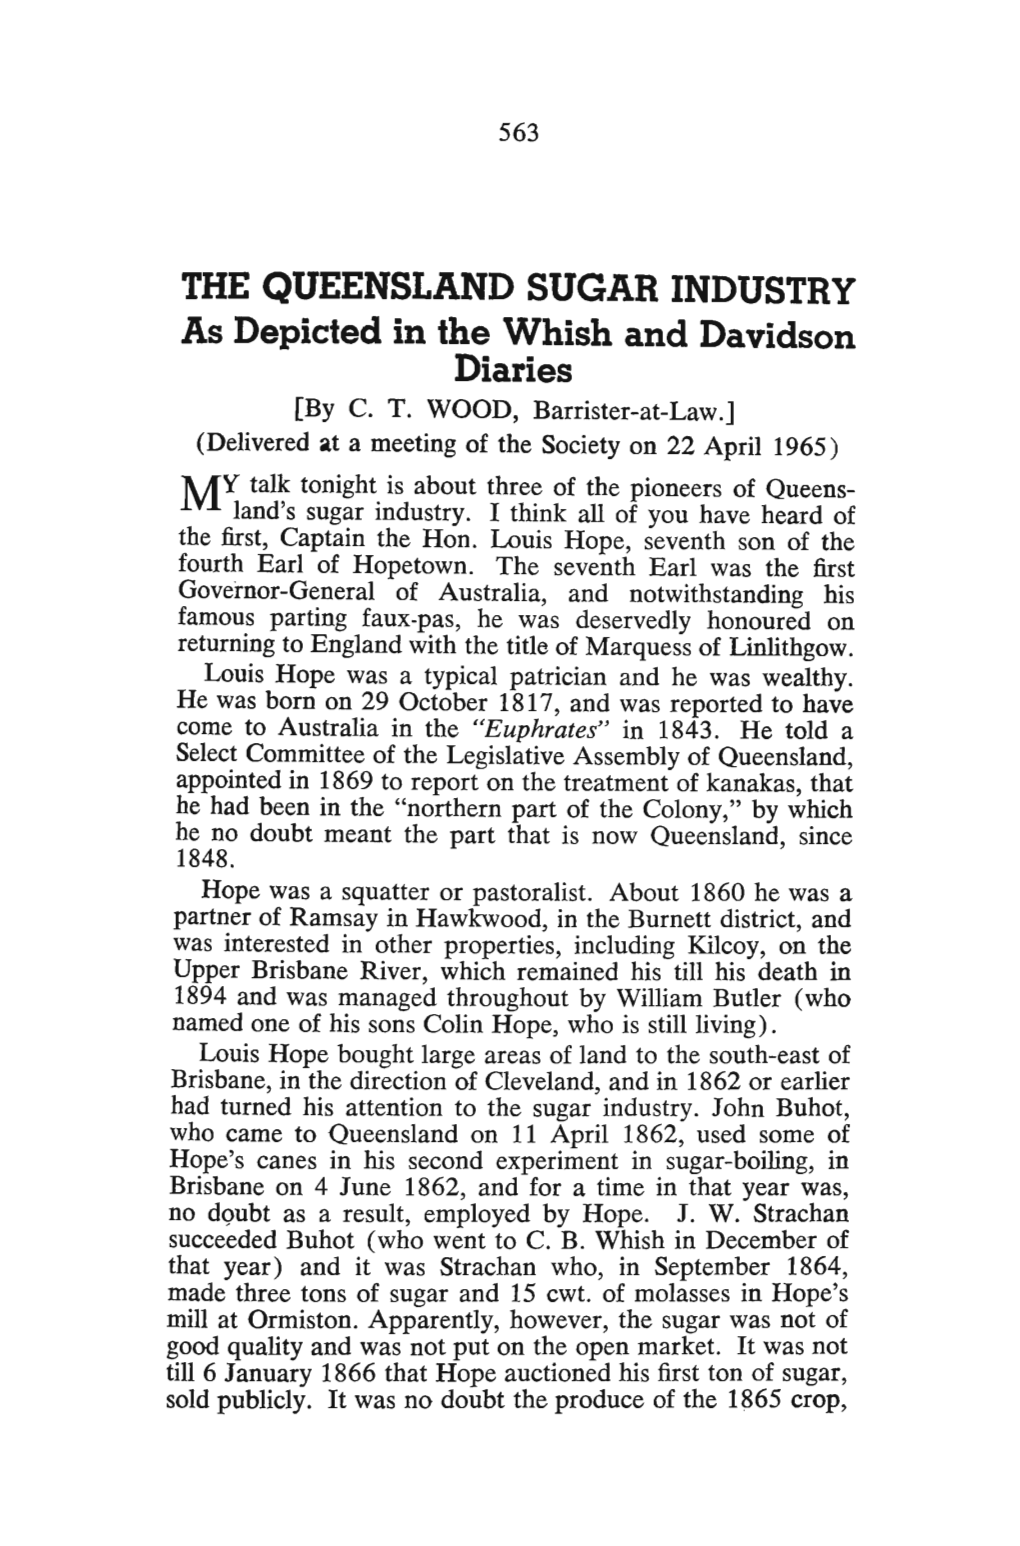 THE QUEENSLAND SUGAR INDUSTRY As Depicted in the Whish and Davidson Diaries [By C